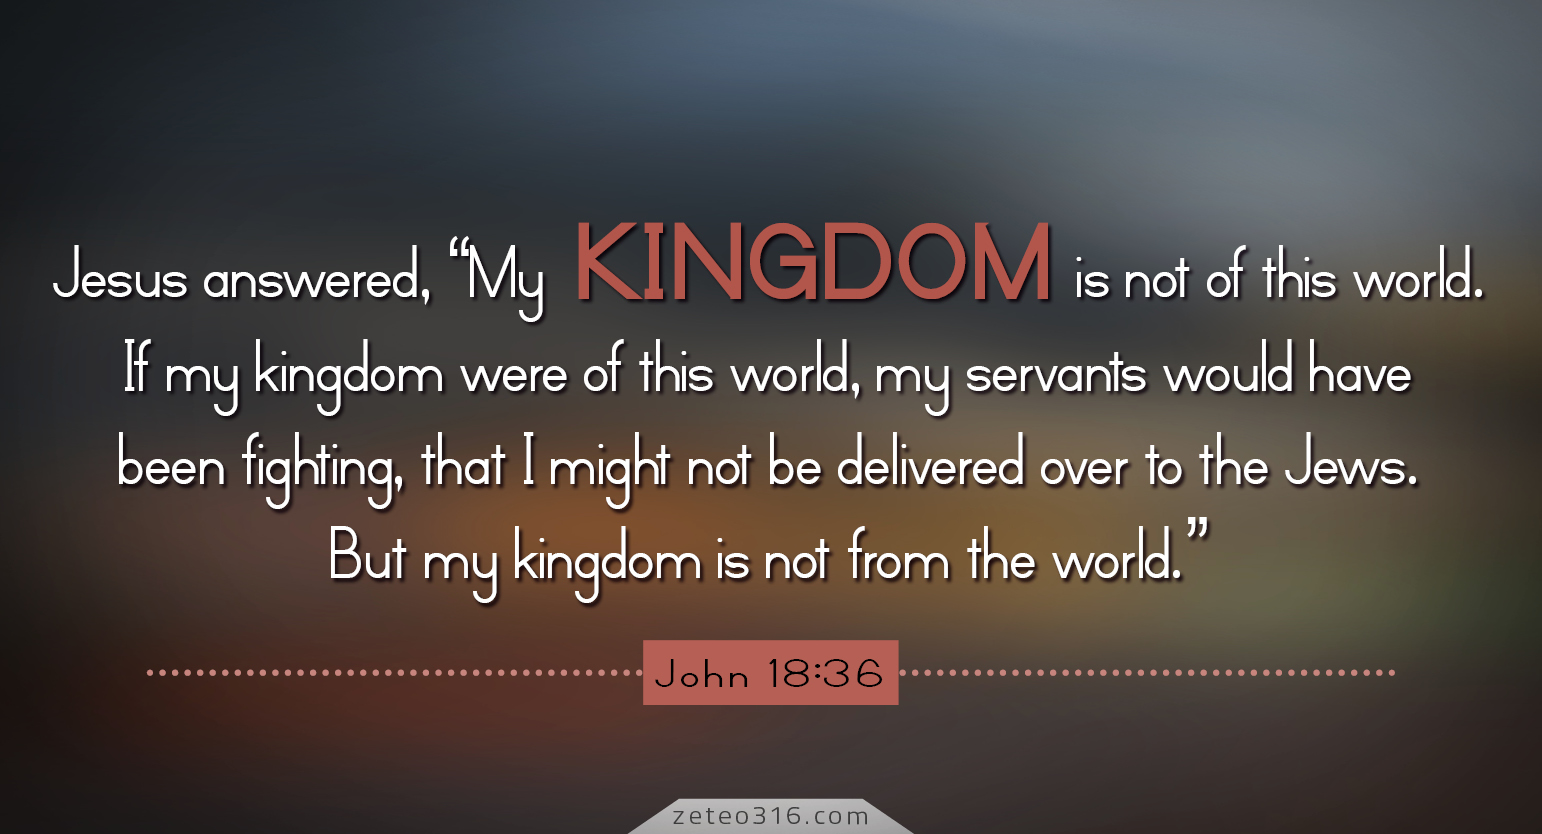 TempAvail on X: JOHN 18:36 #JESUS Answered, “#MY Kingdom Is Not Of This  World. If #MY Kingdom Were Of This World, #MY Servants Would Fight, So That  #I Should Not Be Delivered